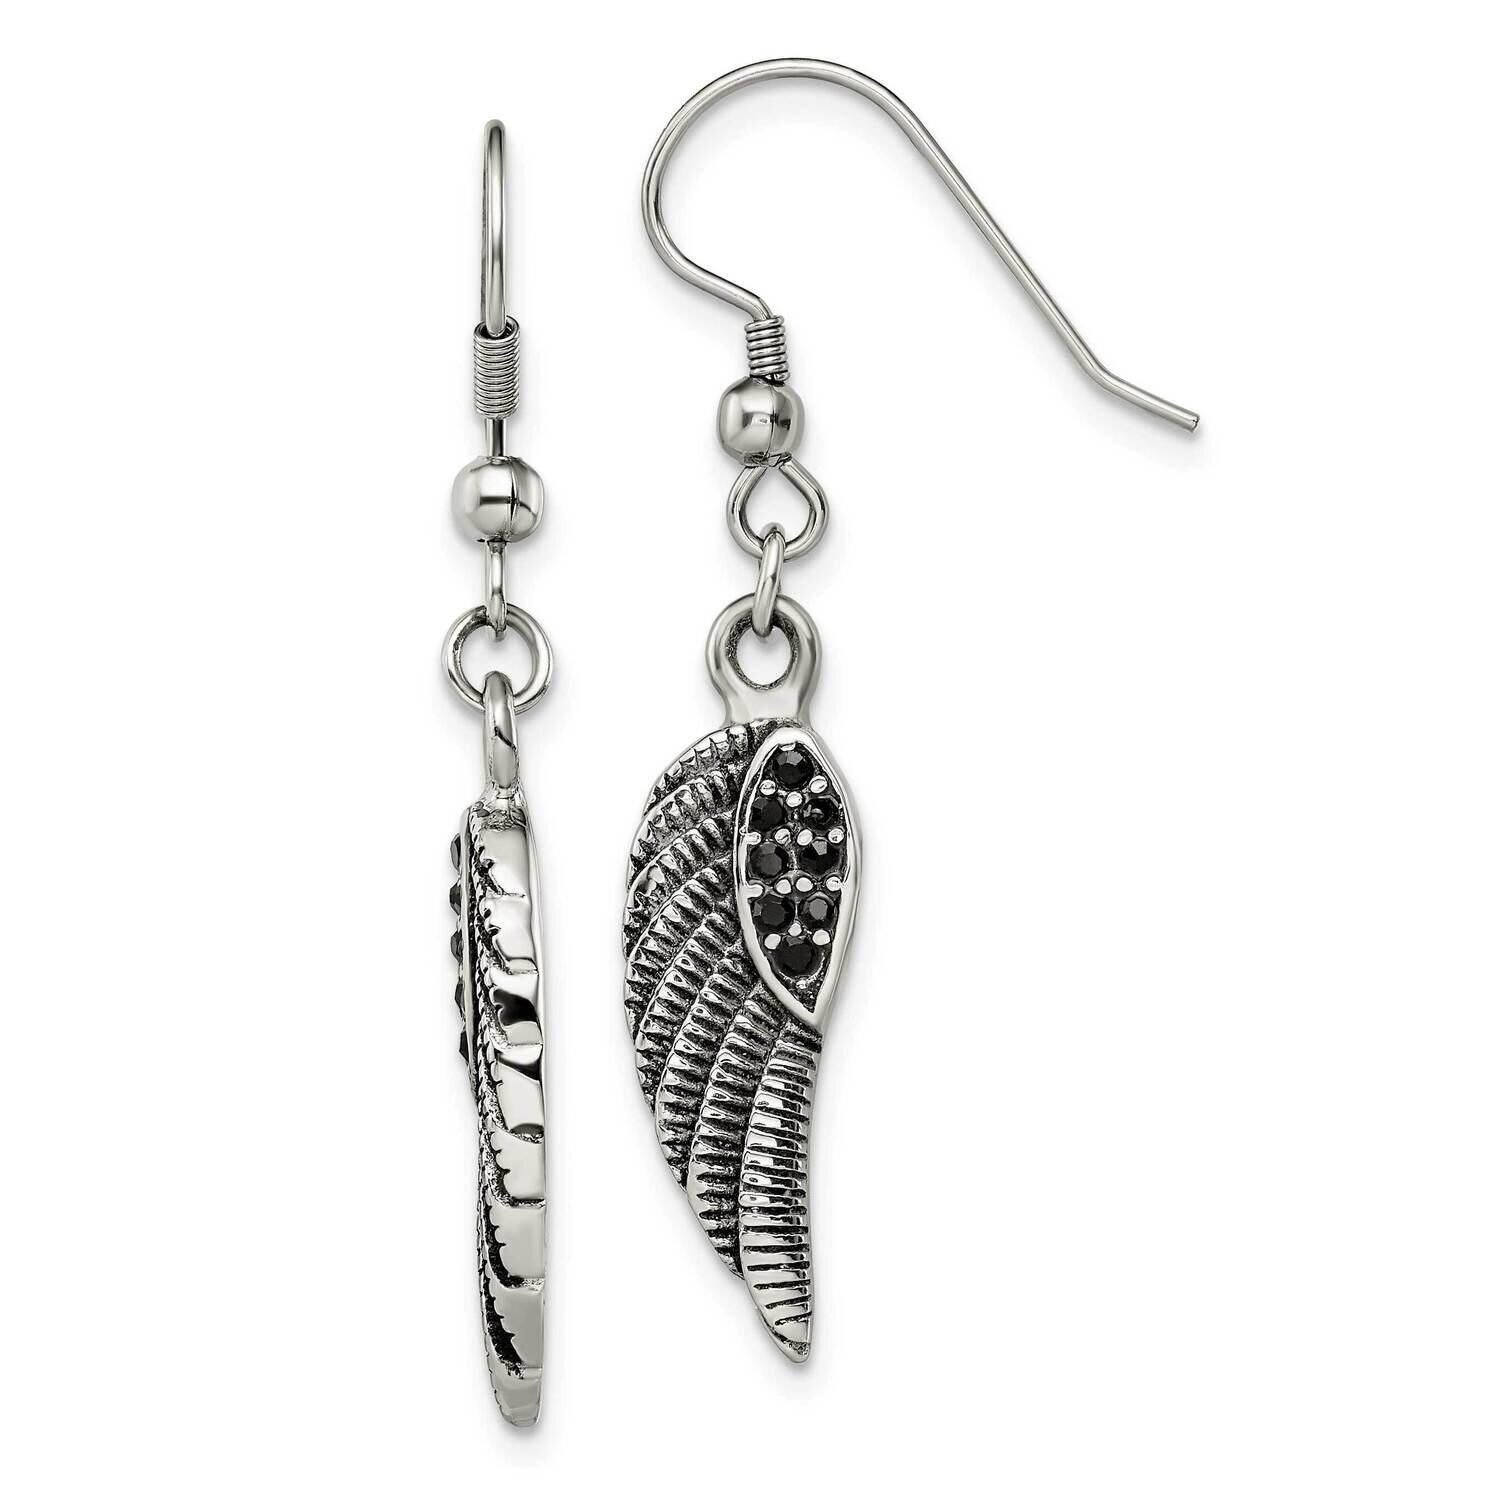 Polished with Black Crystal Wings Dangle Earrings Stainless Steel Antiqued SRE1391